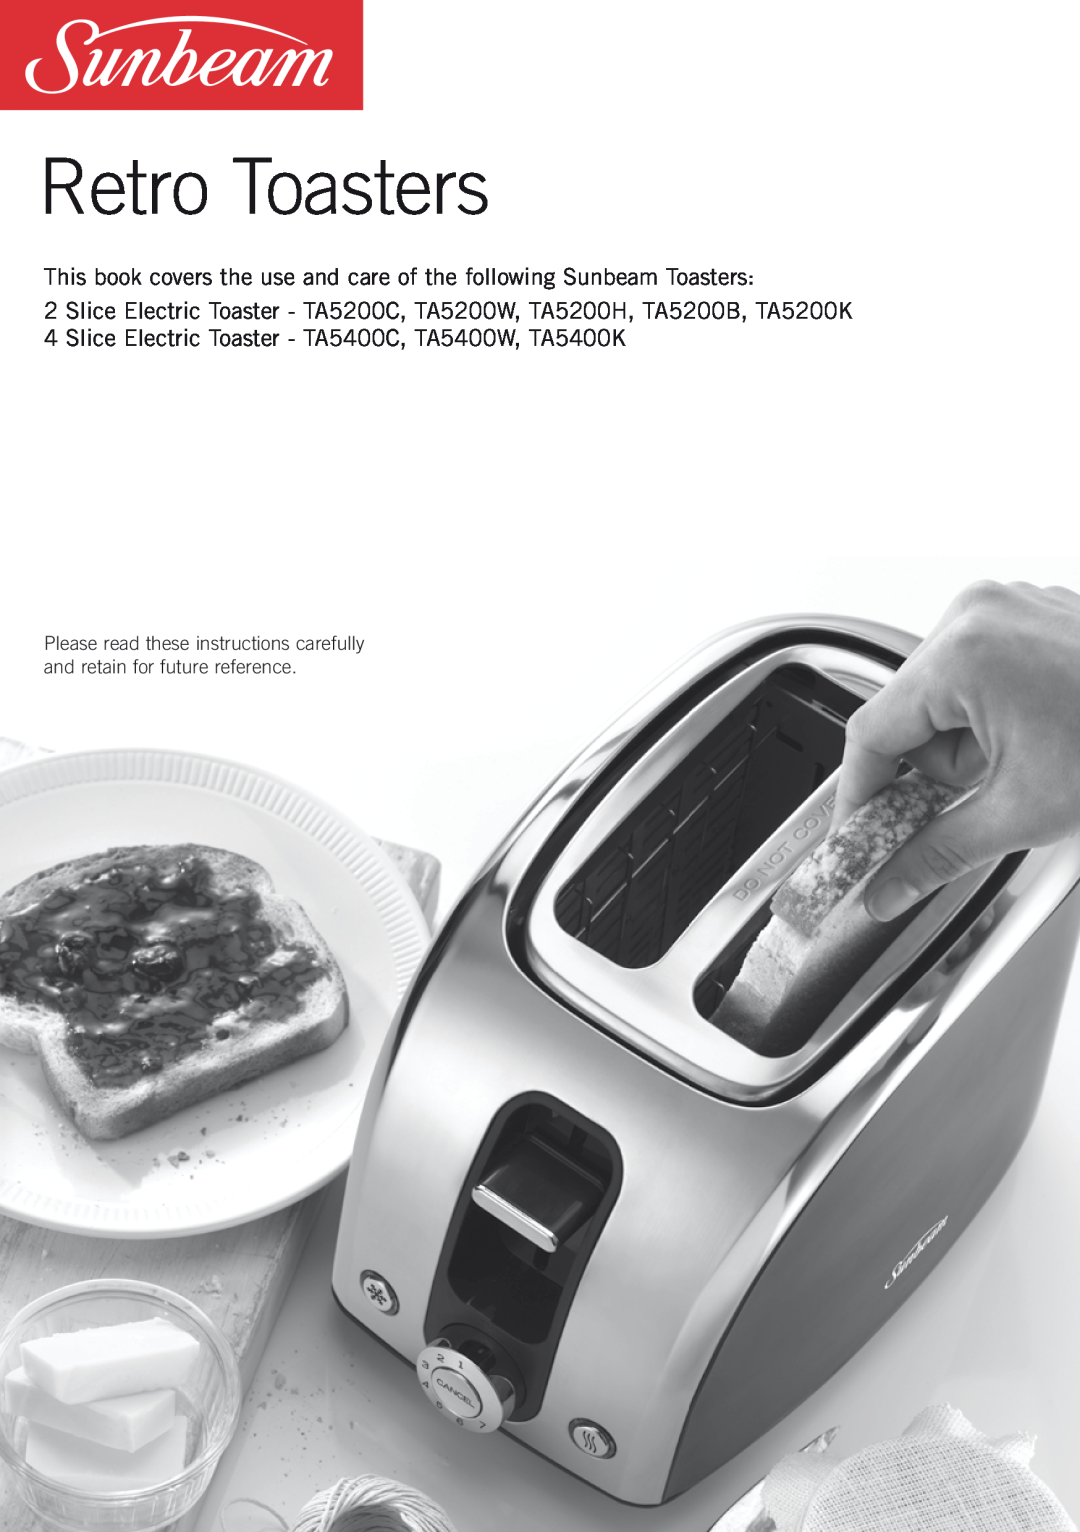 Sunbeam TA5200C, TA5200H manual Retro Toasters, This book covers the use and care of the following Sunbeam Toasters 